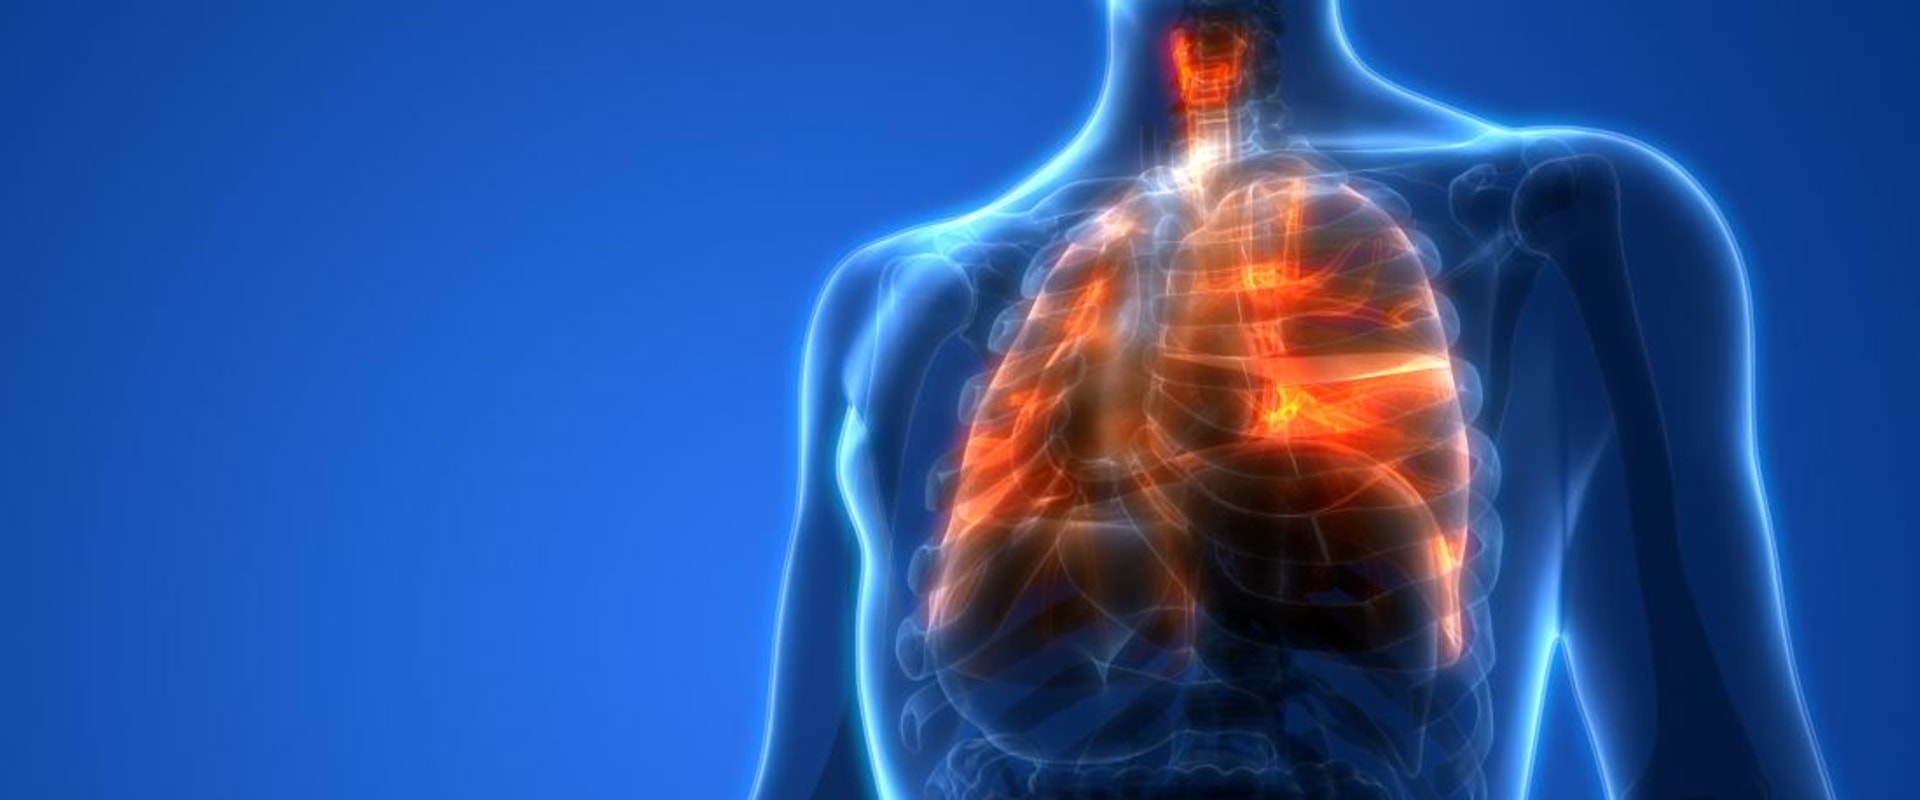 Why are healthy lungs important?